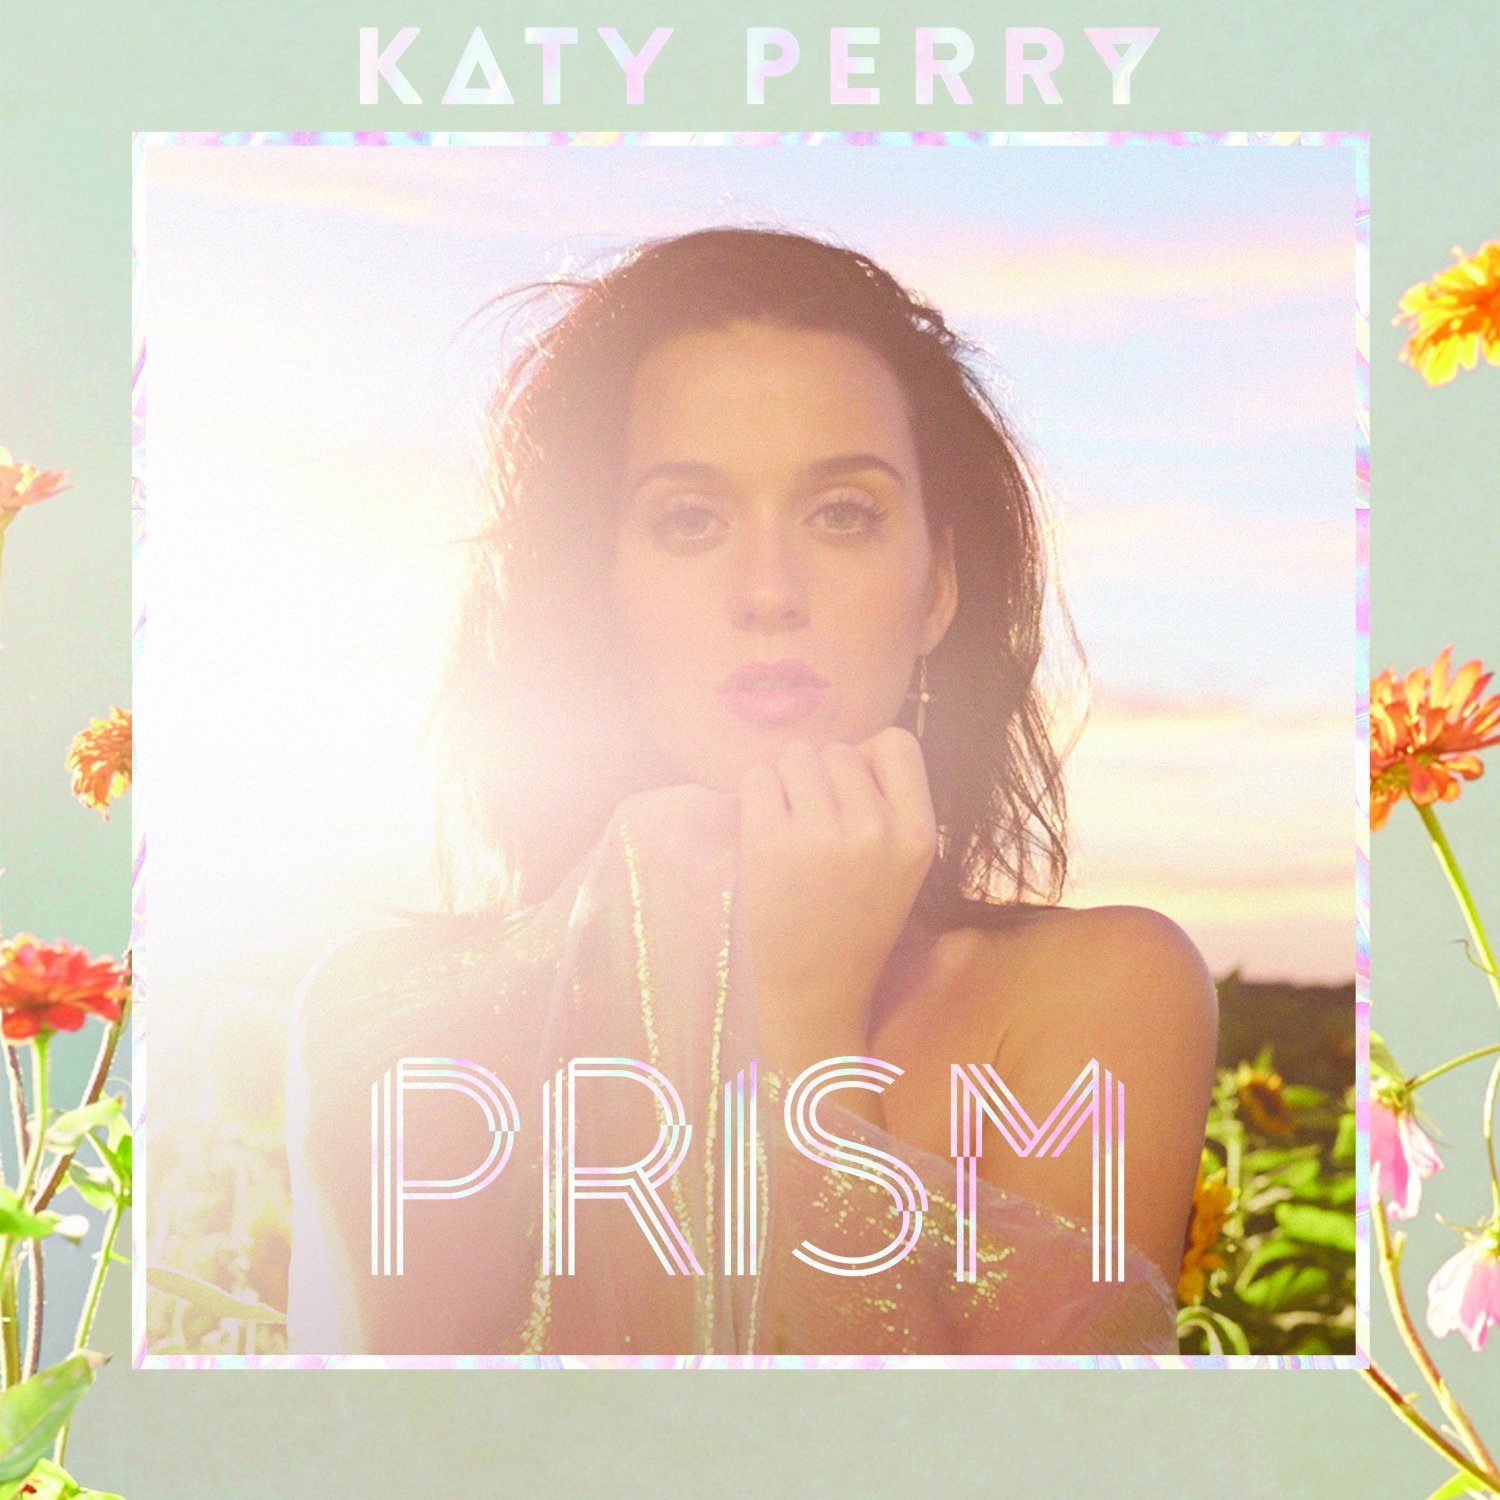 katy-perry-prism